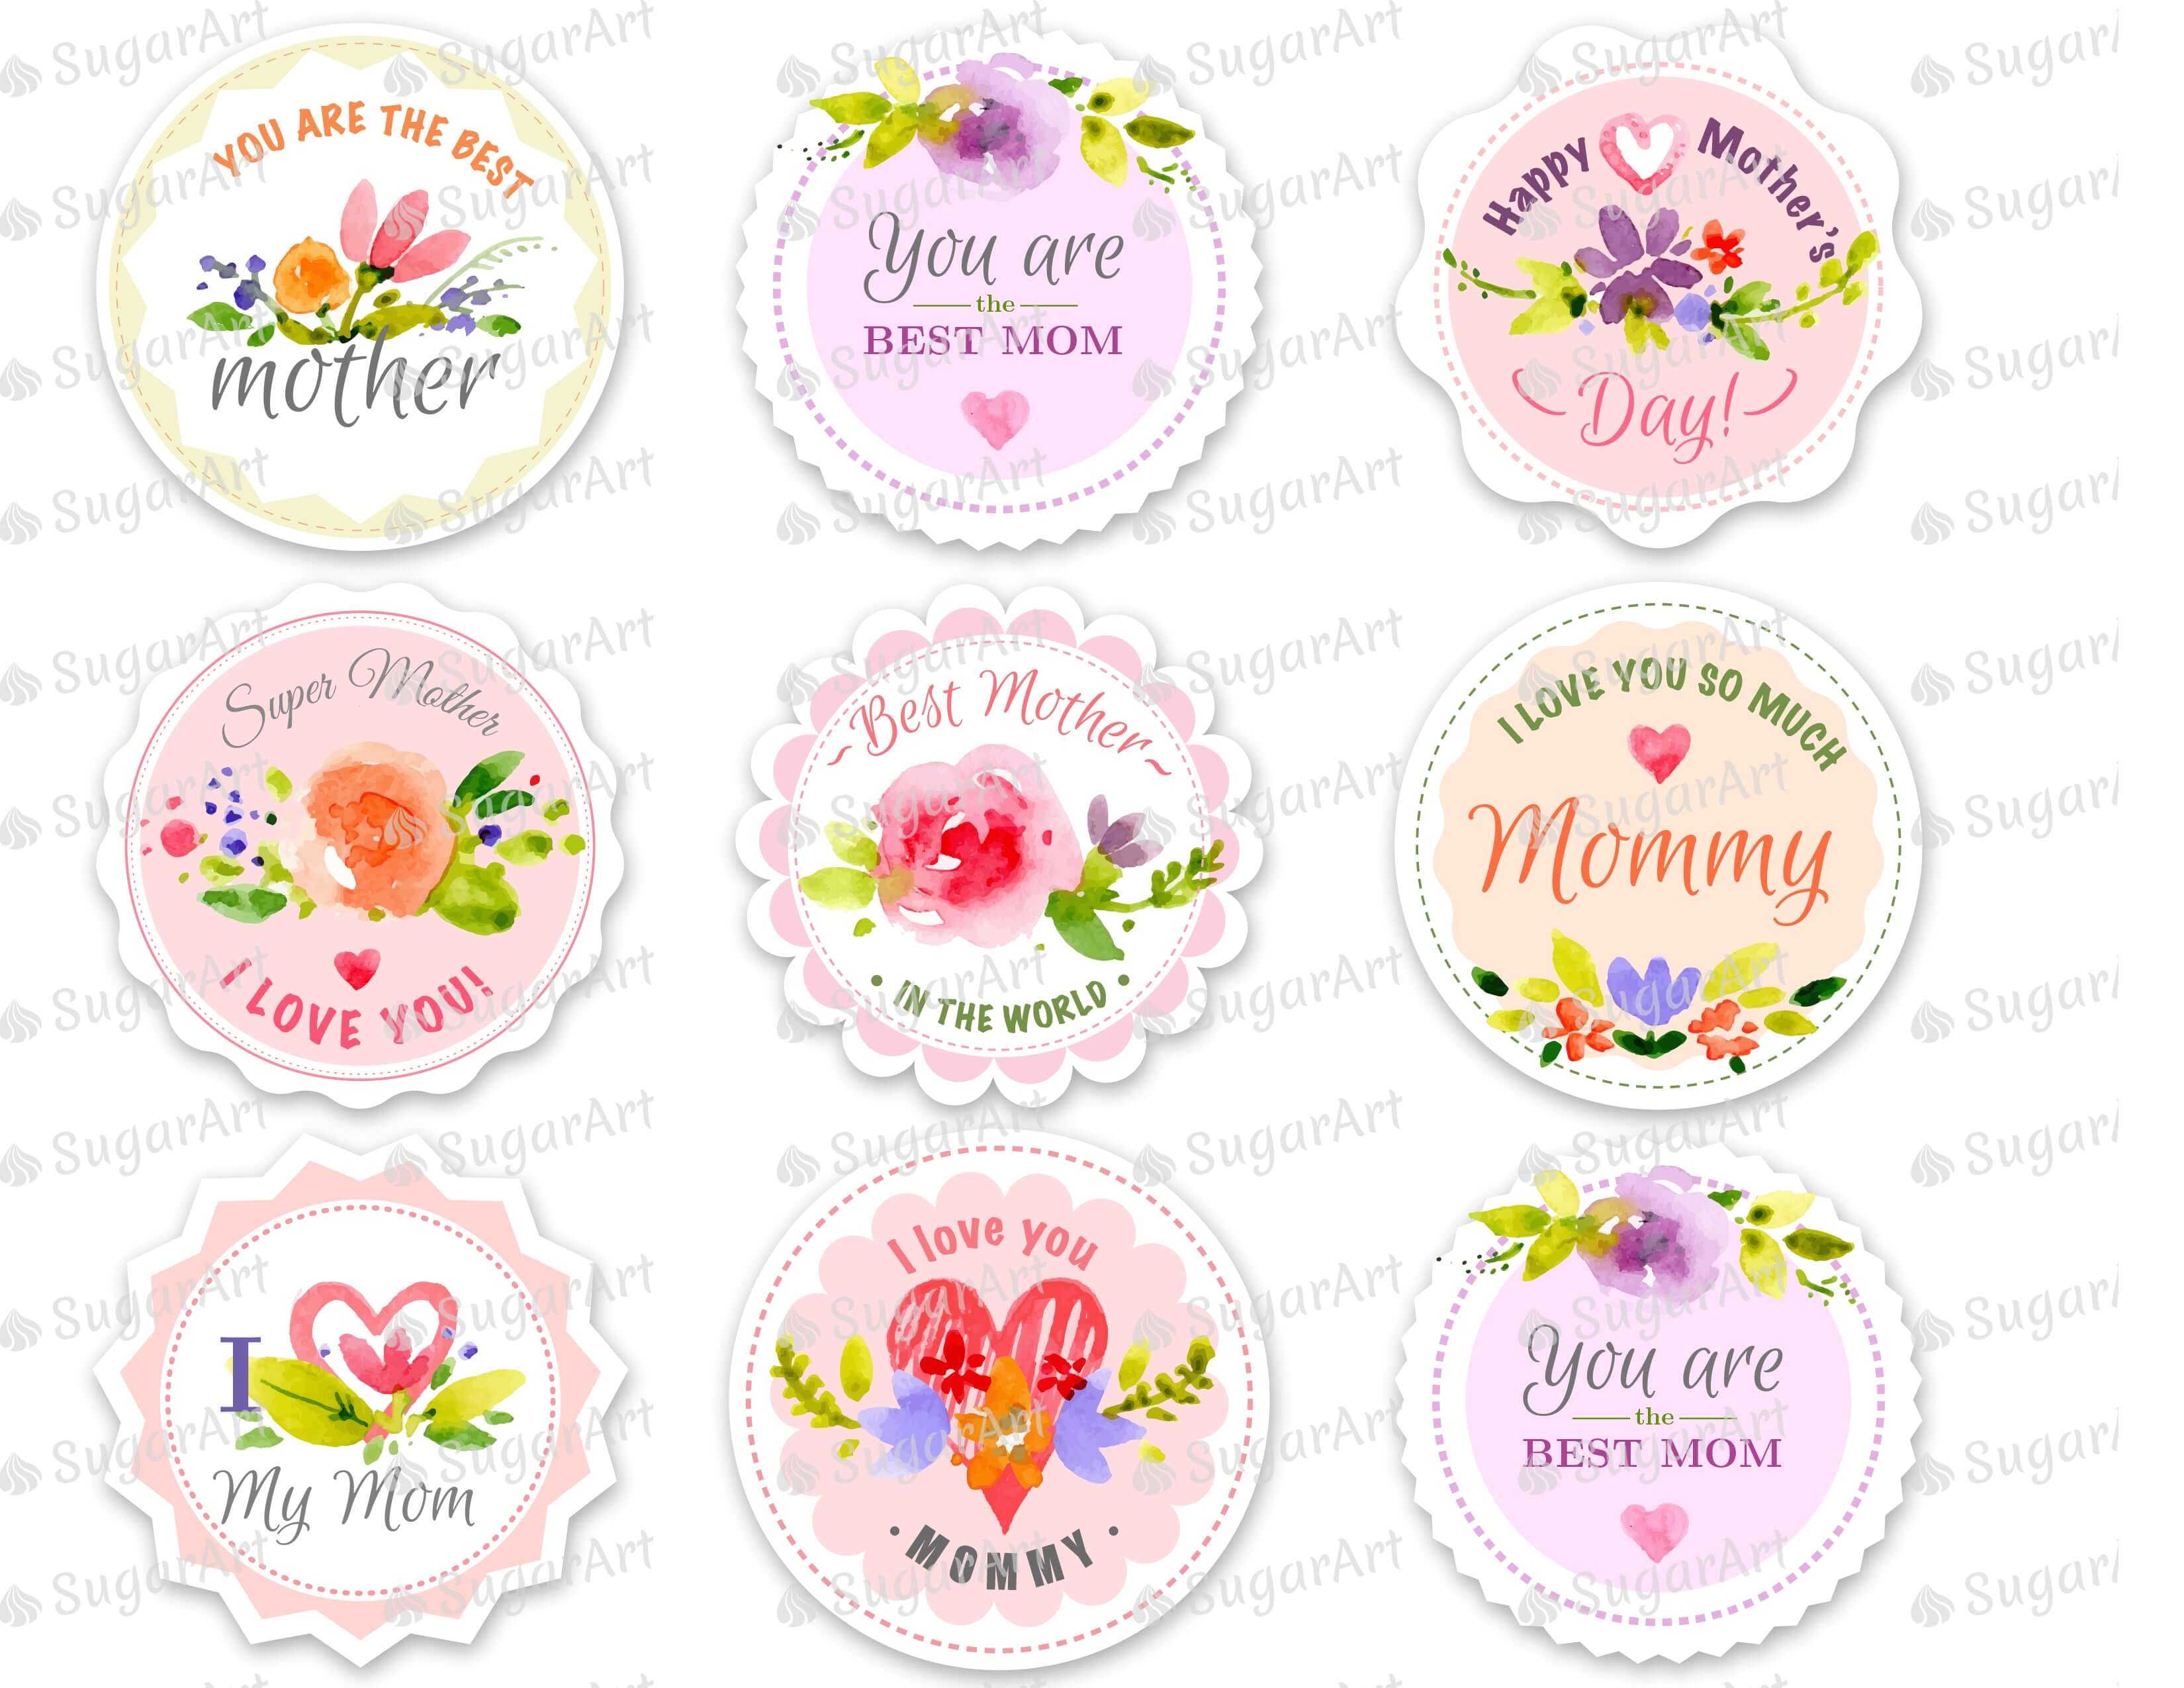 Happy Mother's Day - 9 circles 3" - Icing - ISA253.